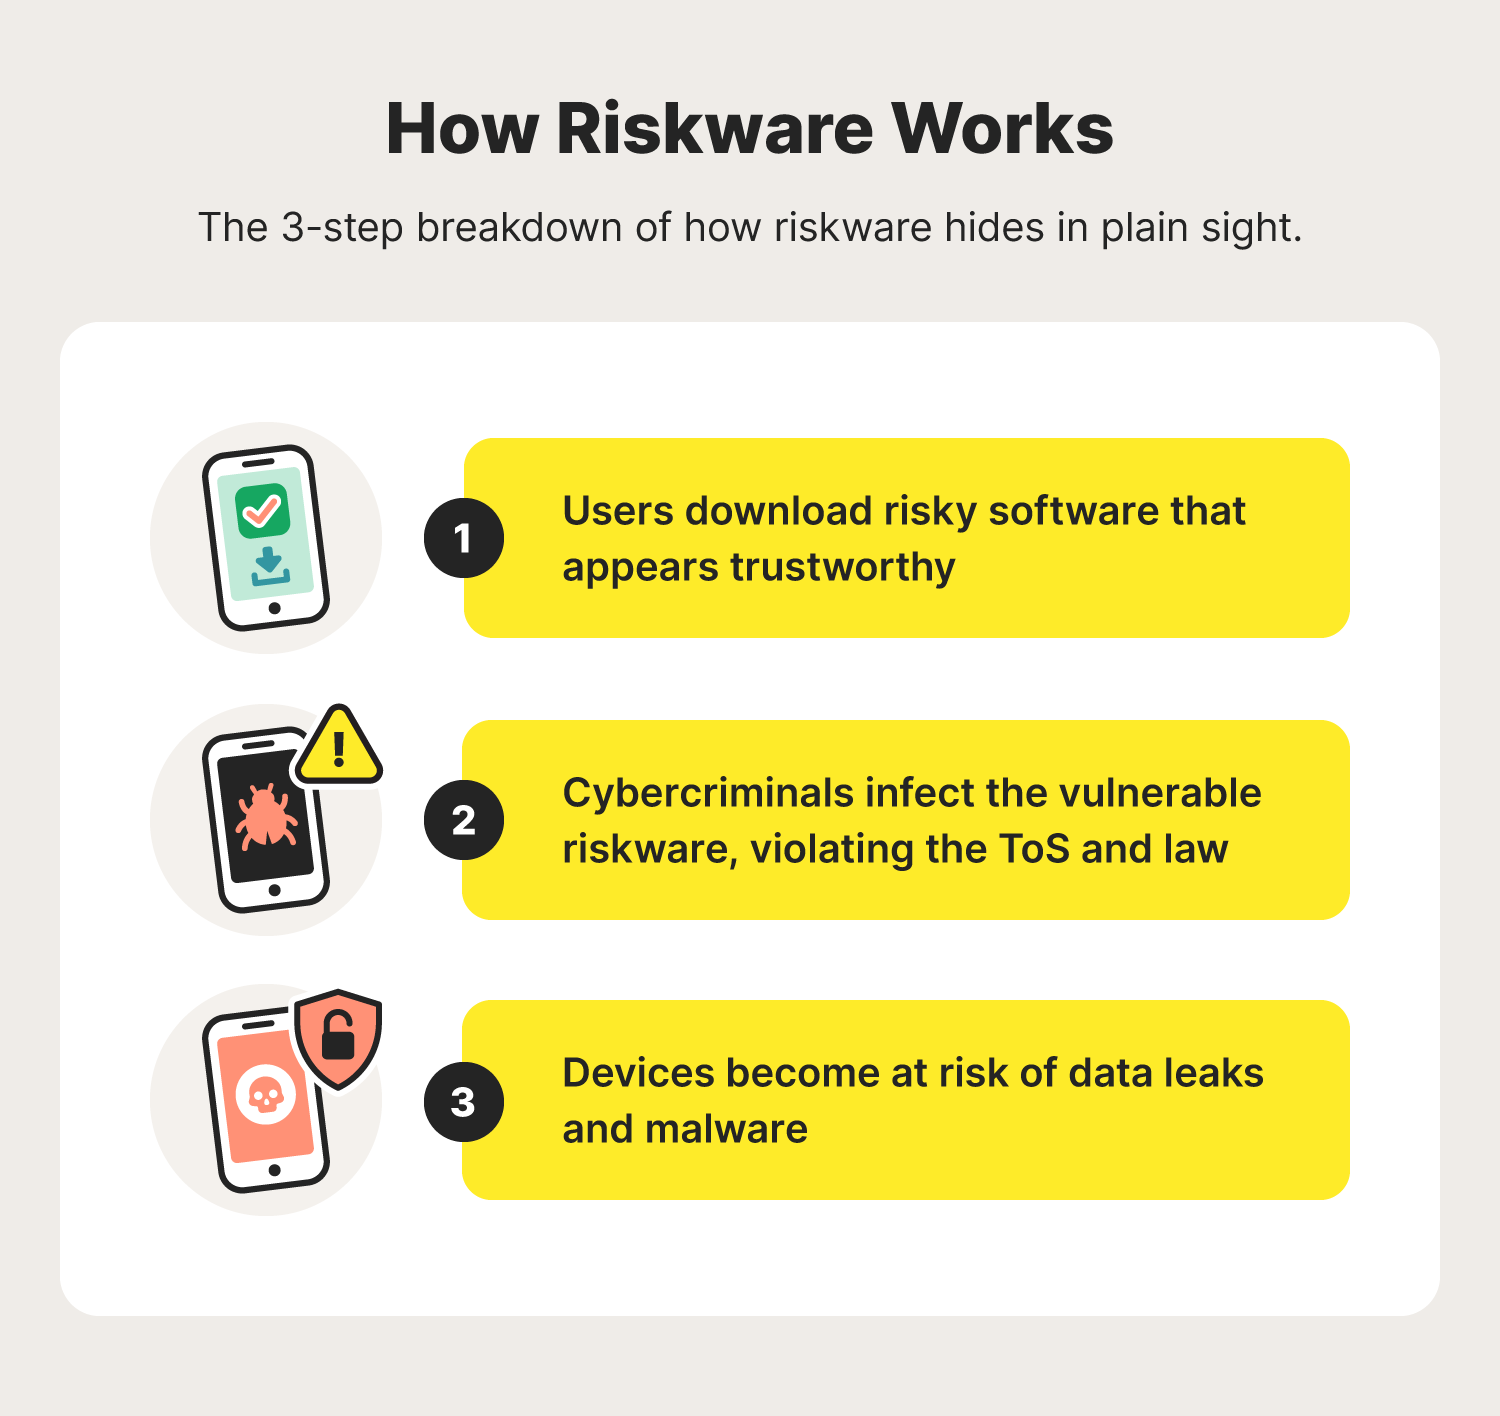 A graphic shares a three-step breakdown of how riskware works with mobile devices showcasing the process